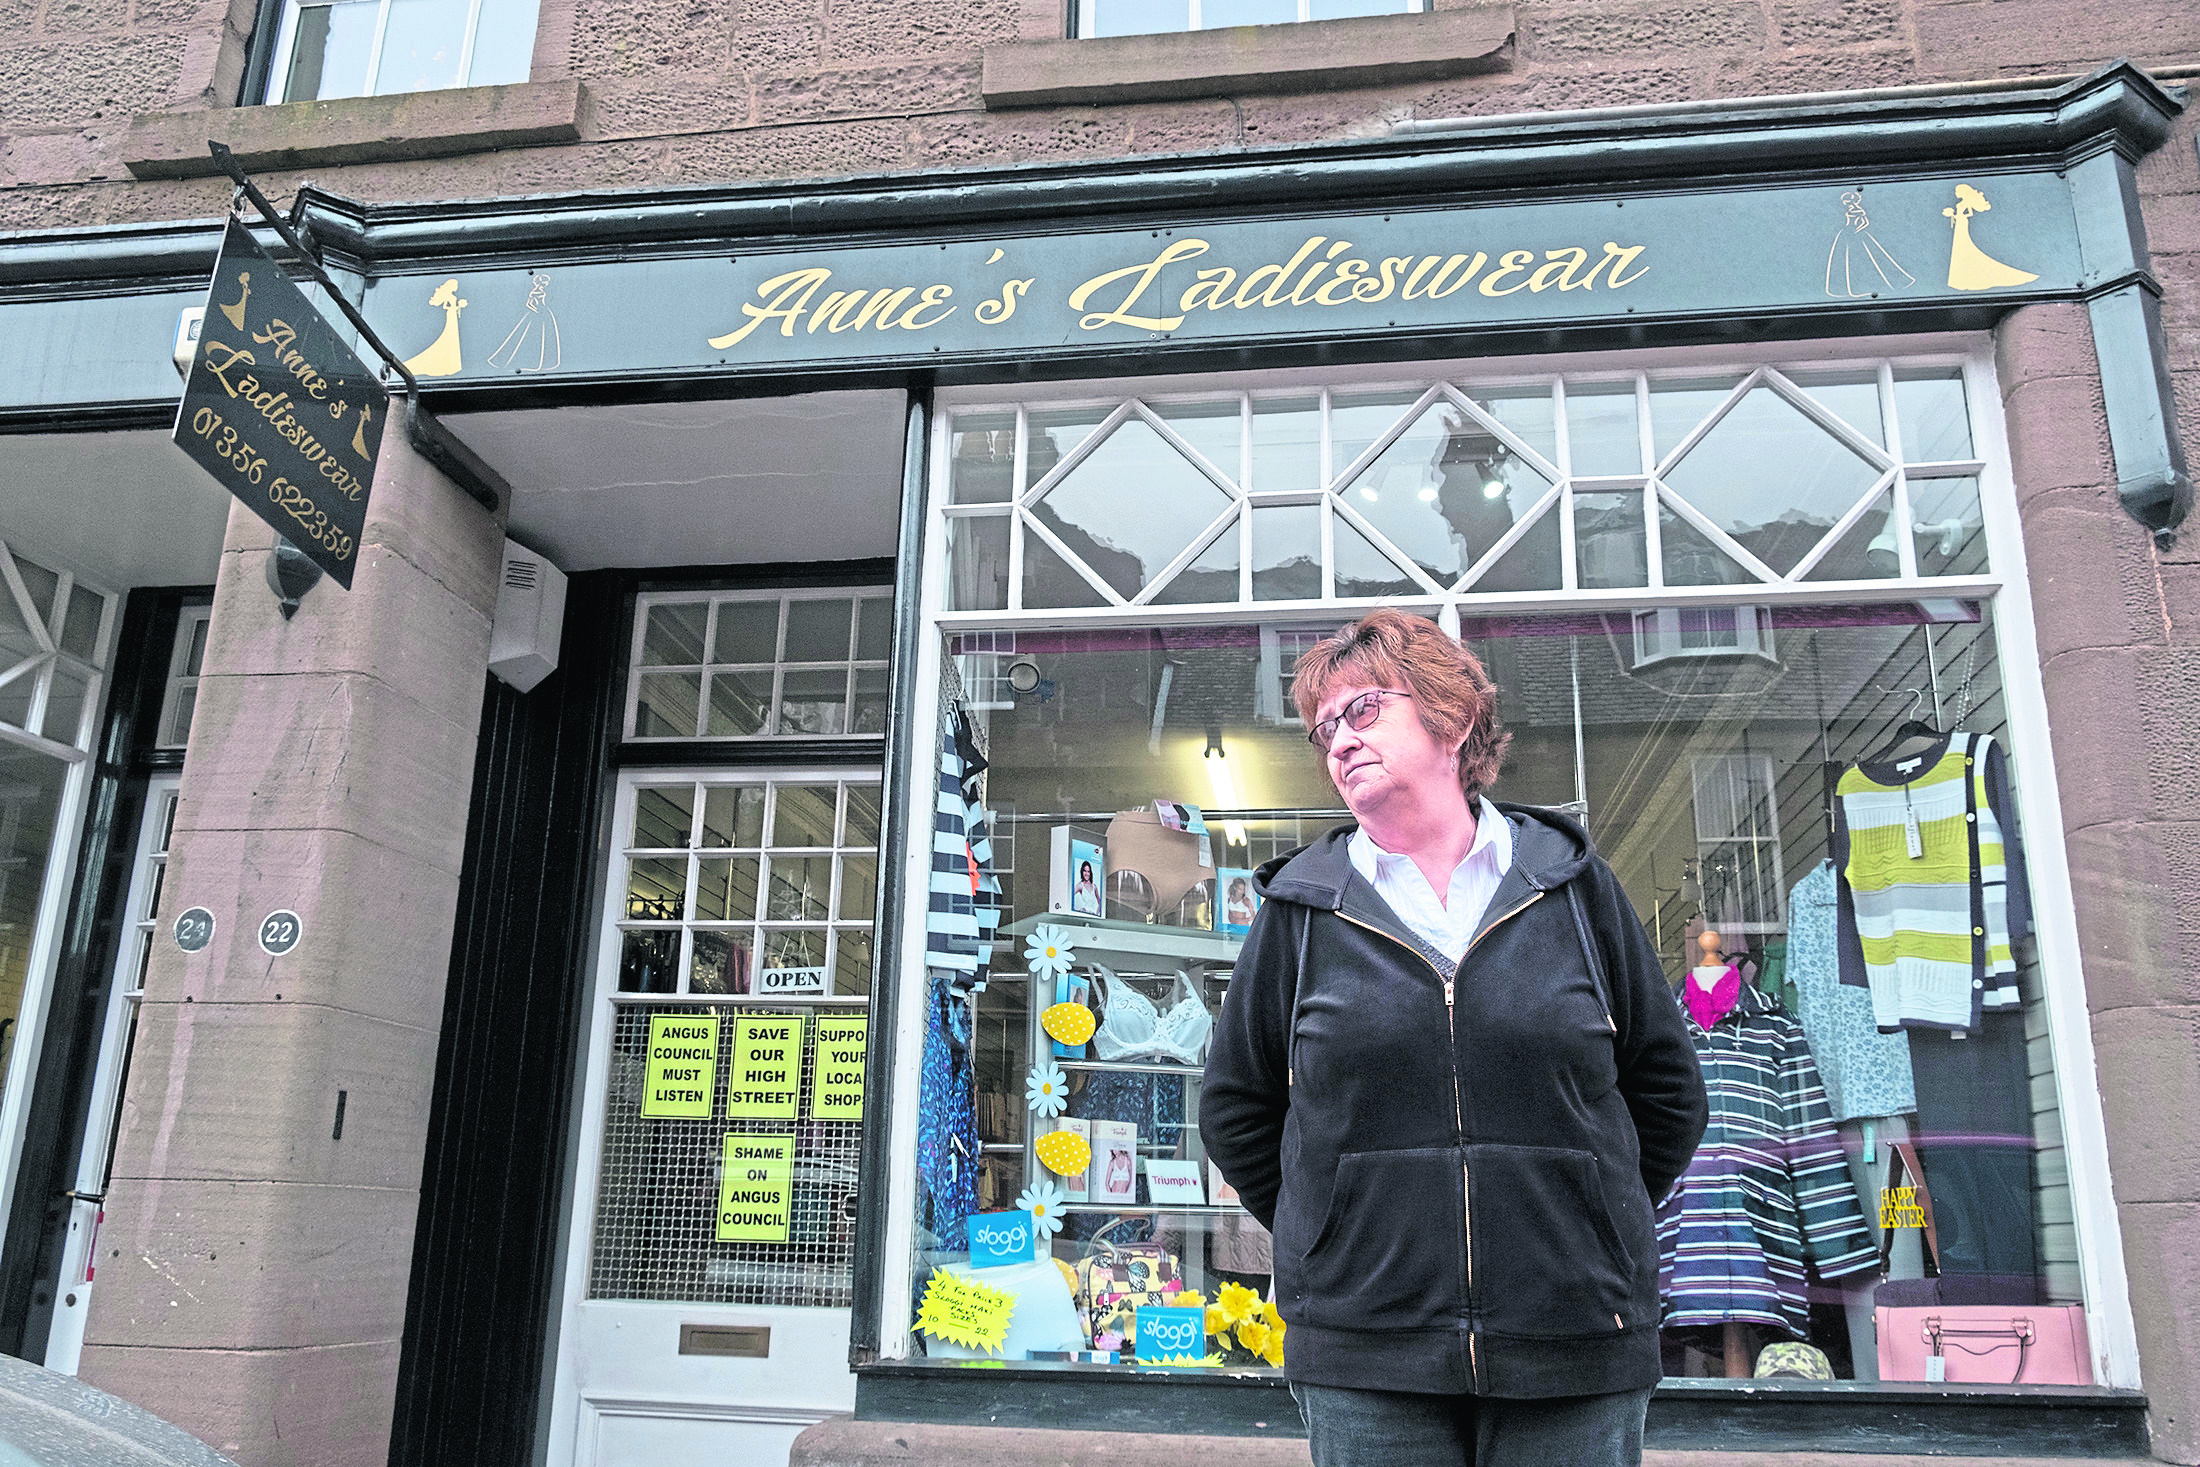 Owner Anne Watson previously spoke of fears for her business after the EWM plans were announced.